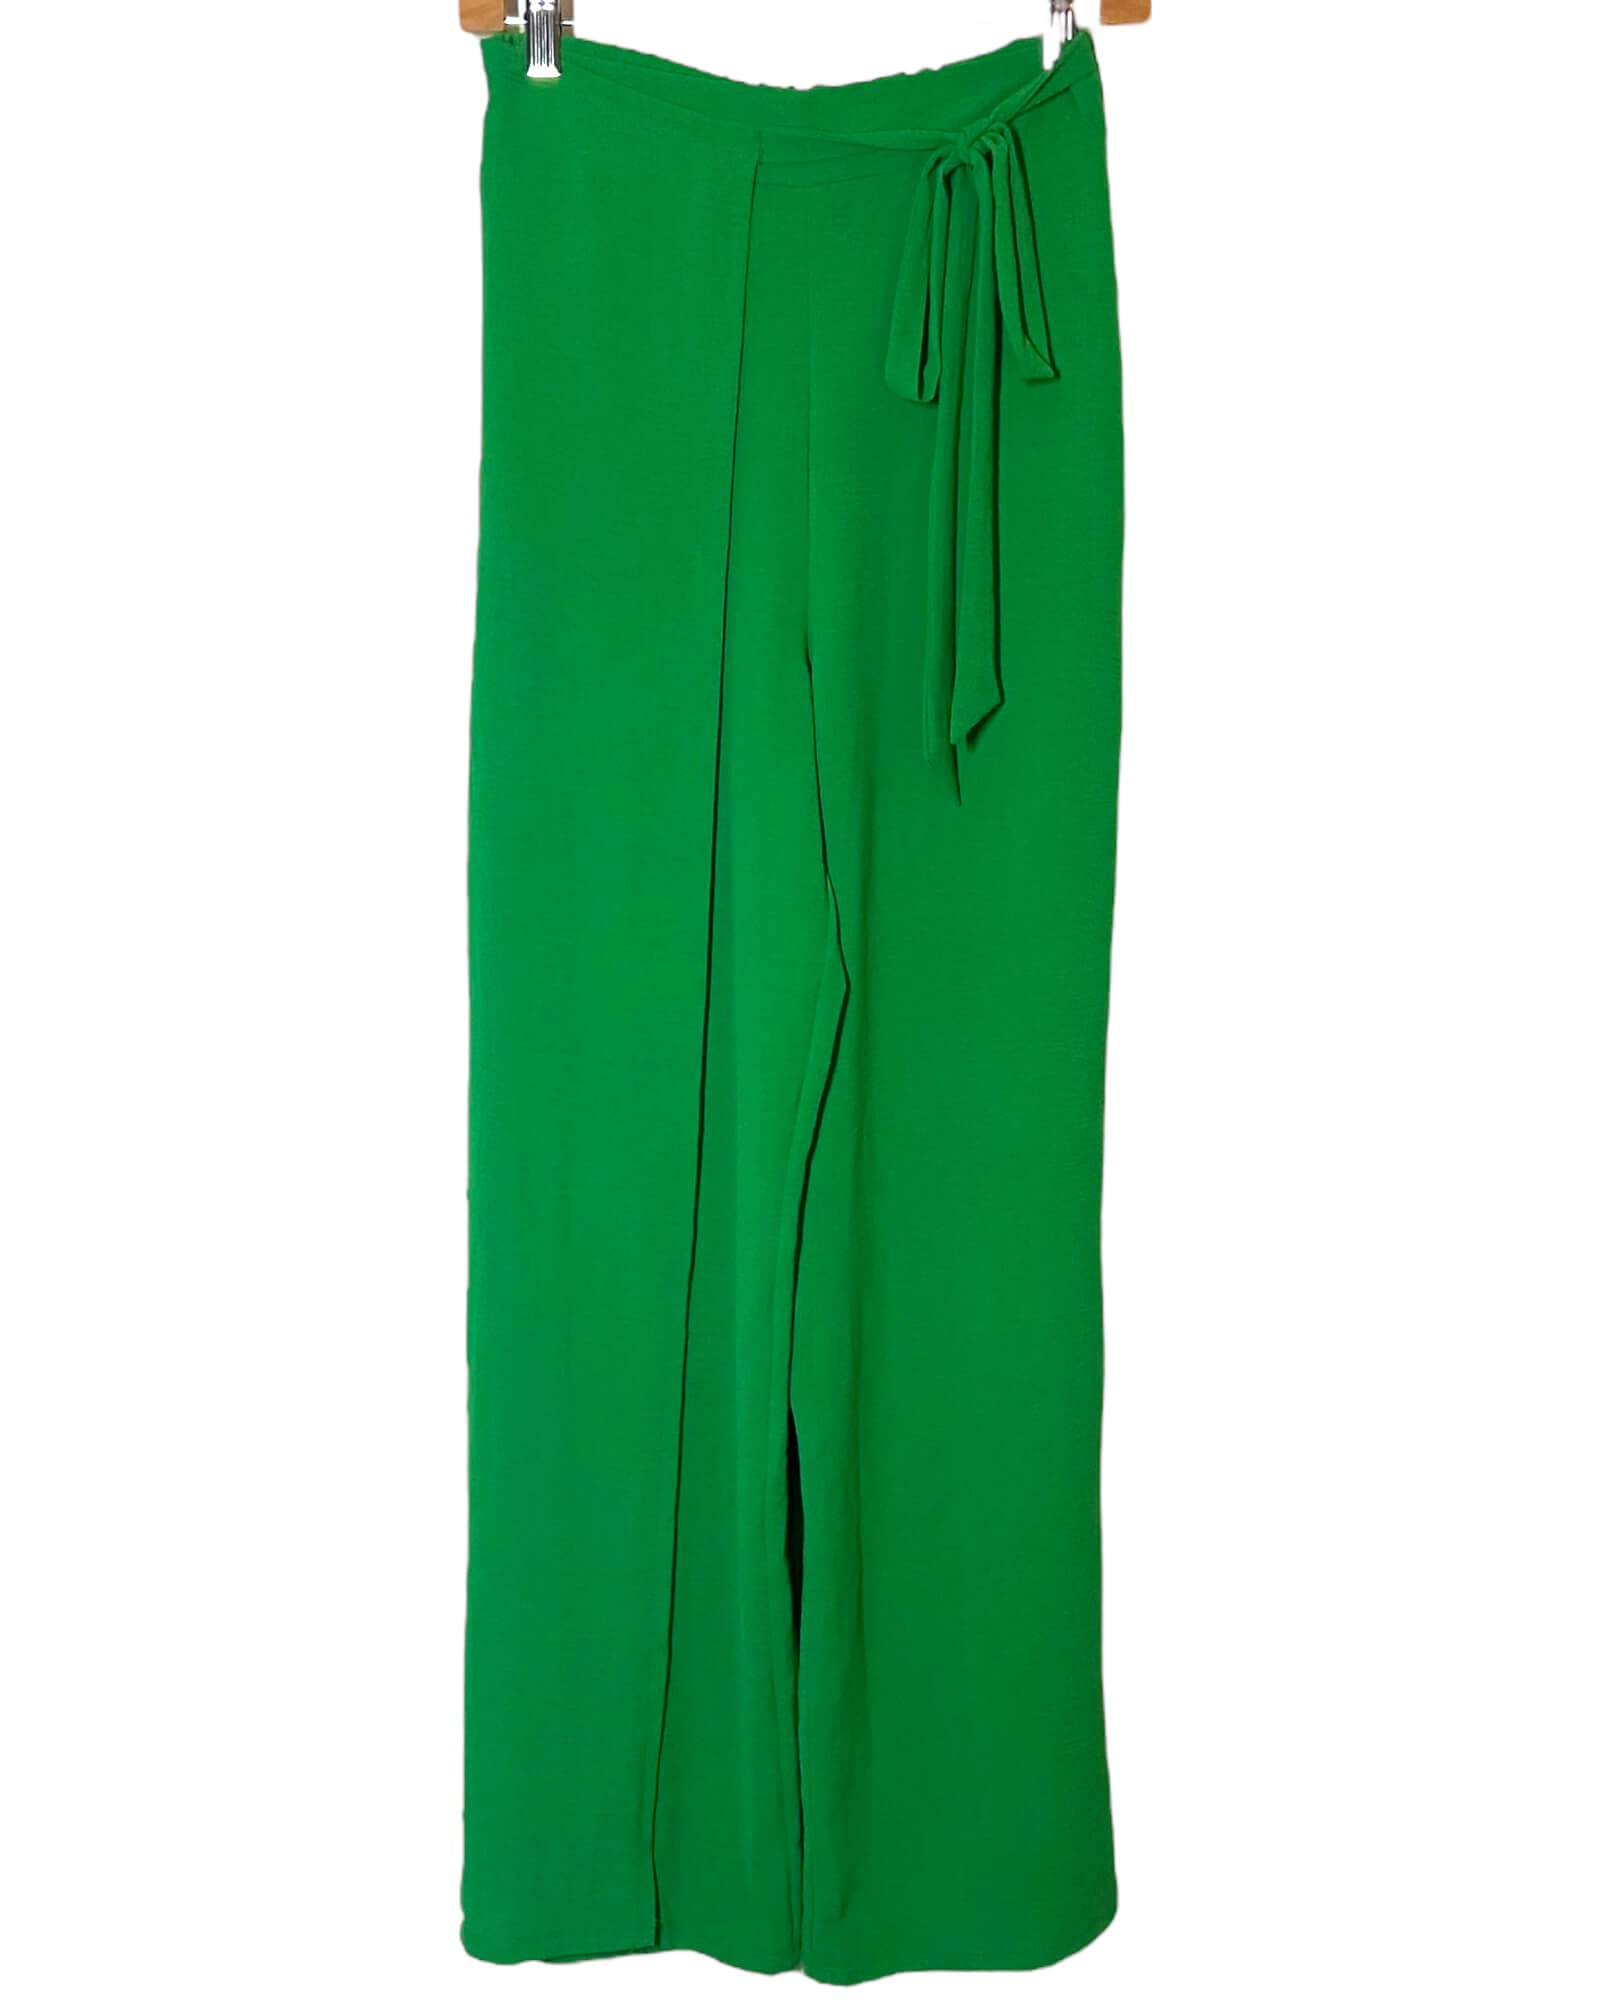 WIDE WRAP TROUSERS